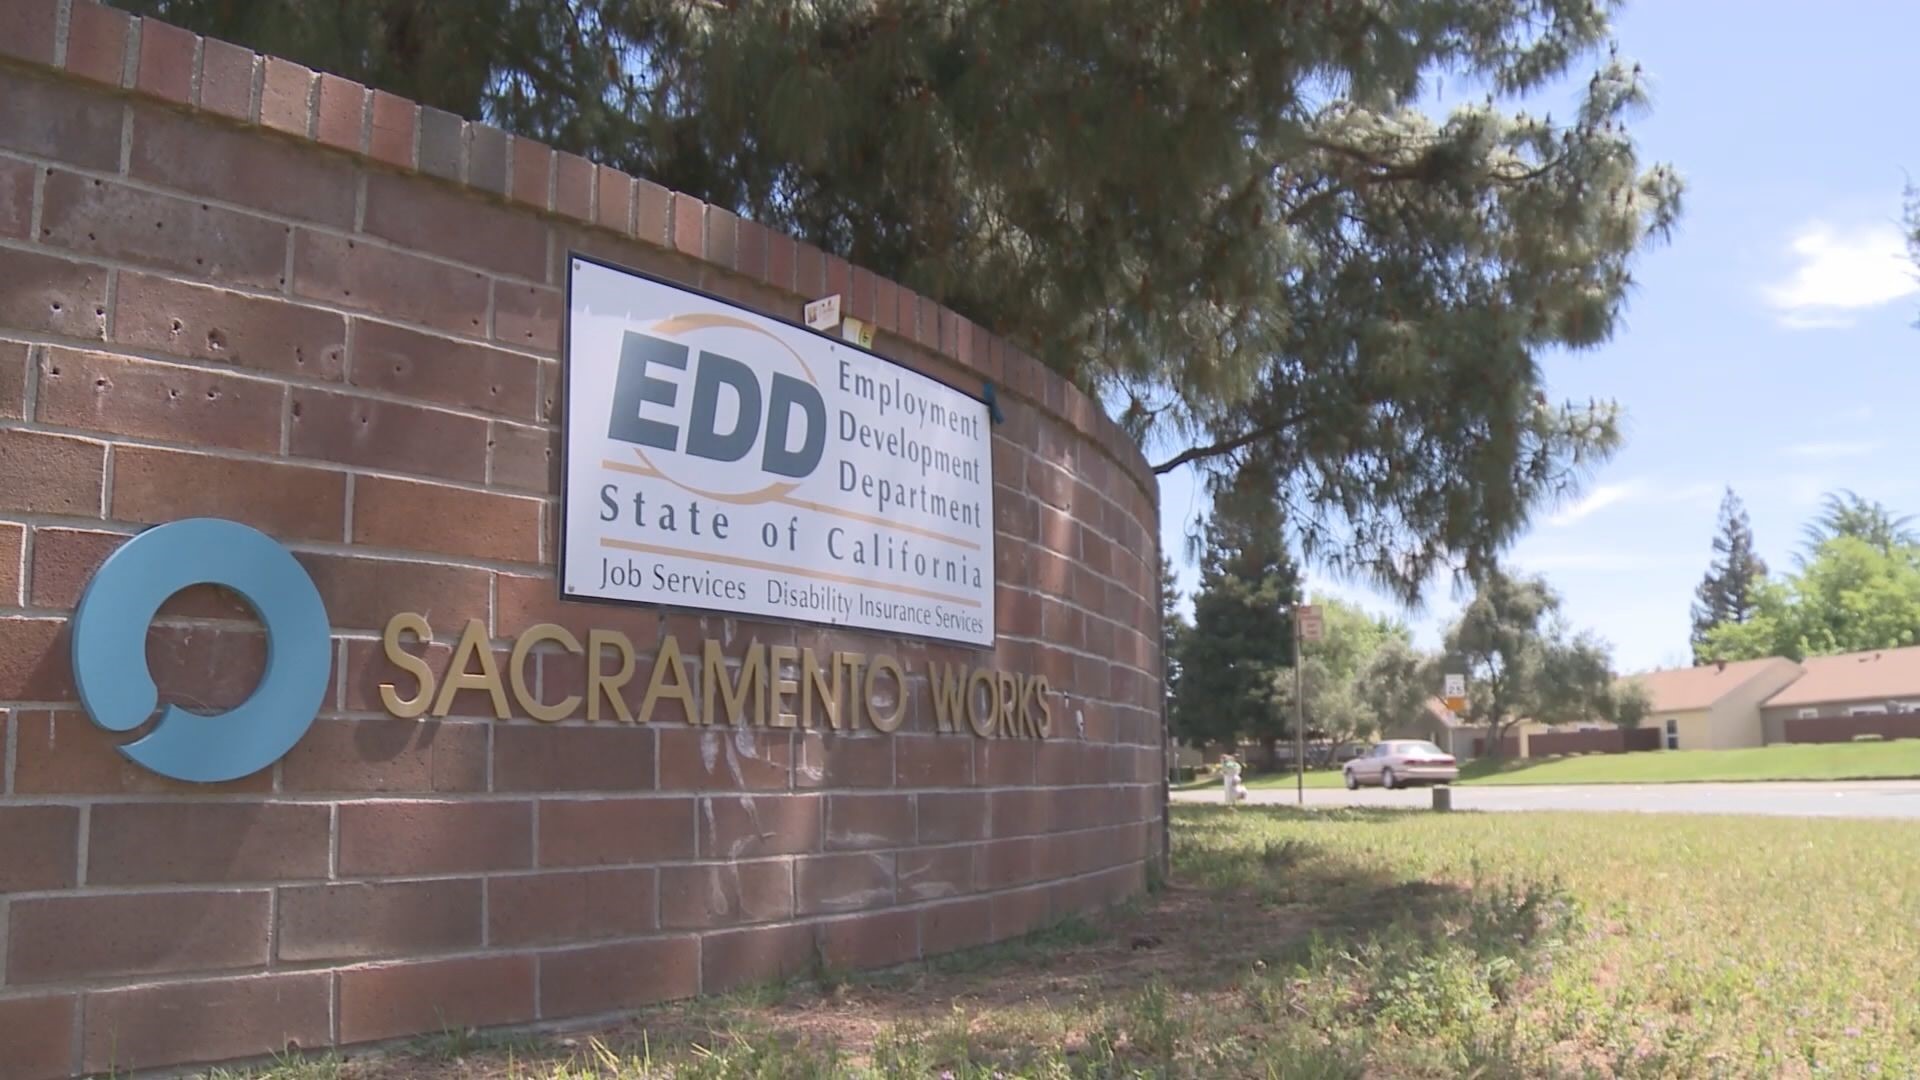 "We're five months into this and we're still having issues, that's unacceptable," State Assemblymember Jim Cooper said Friday.